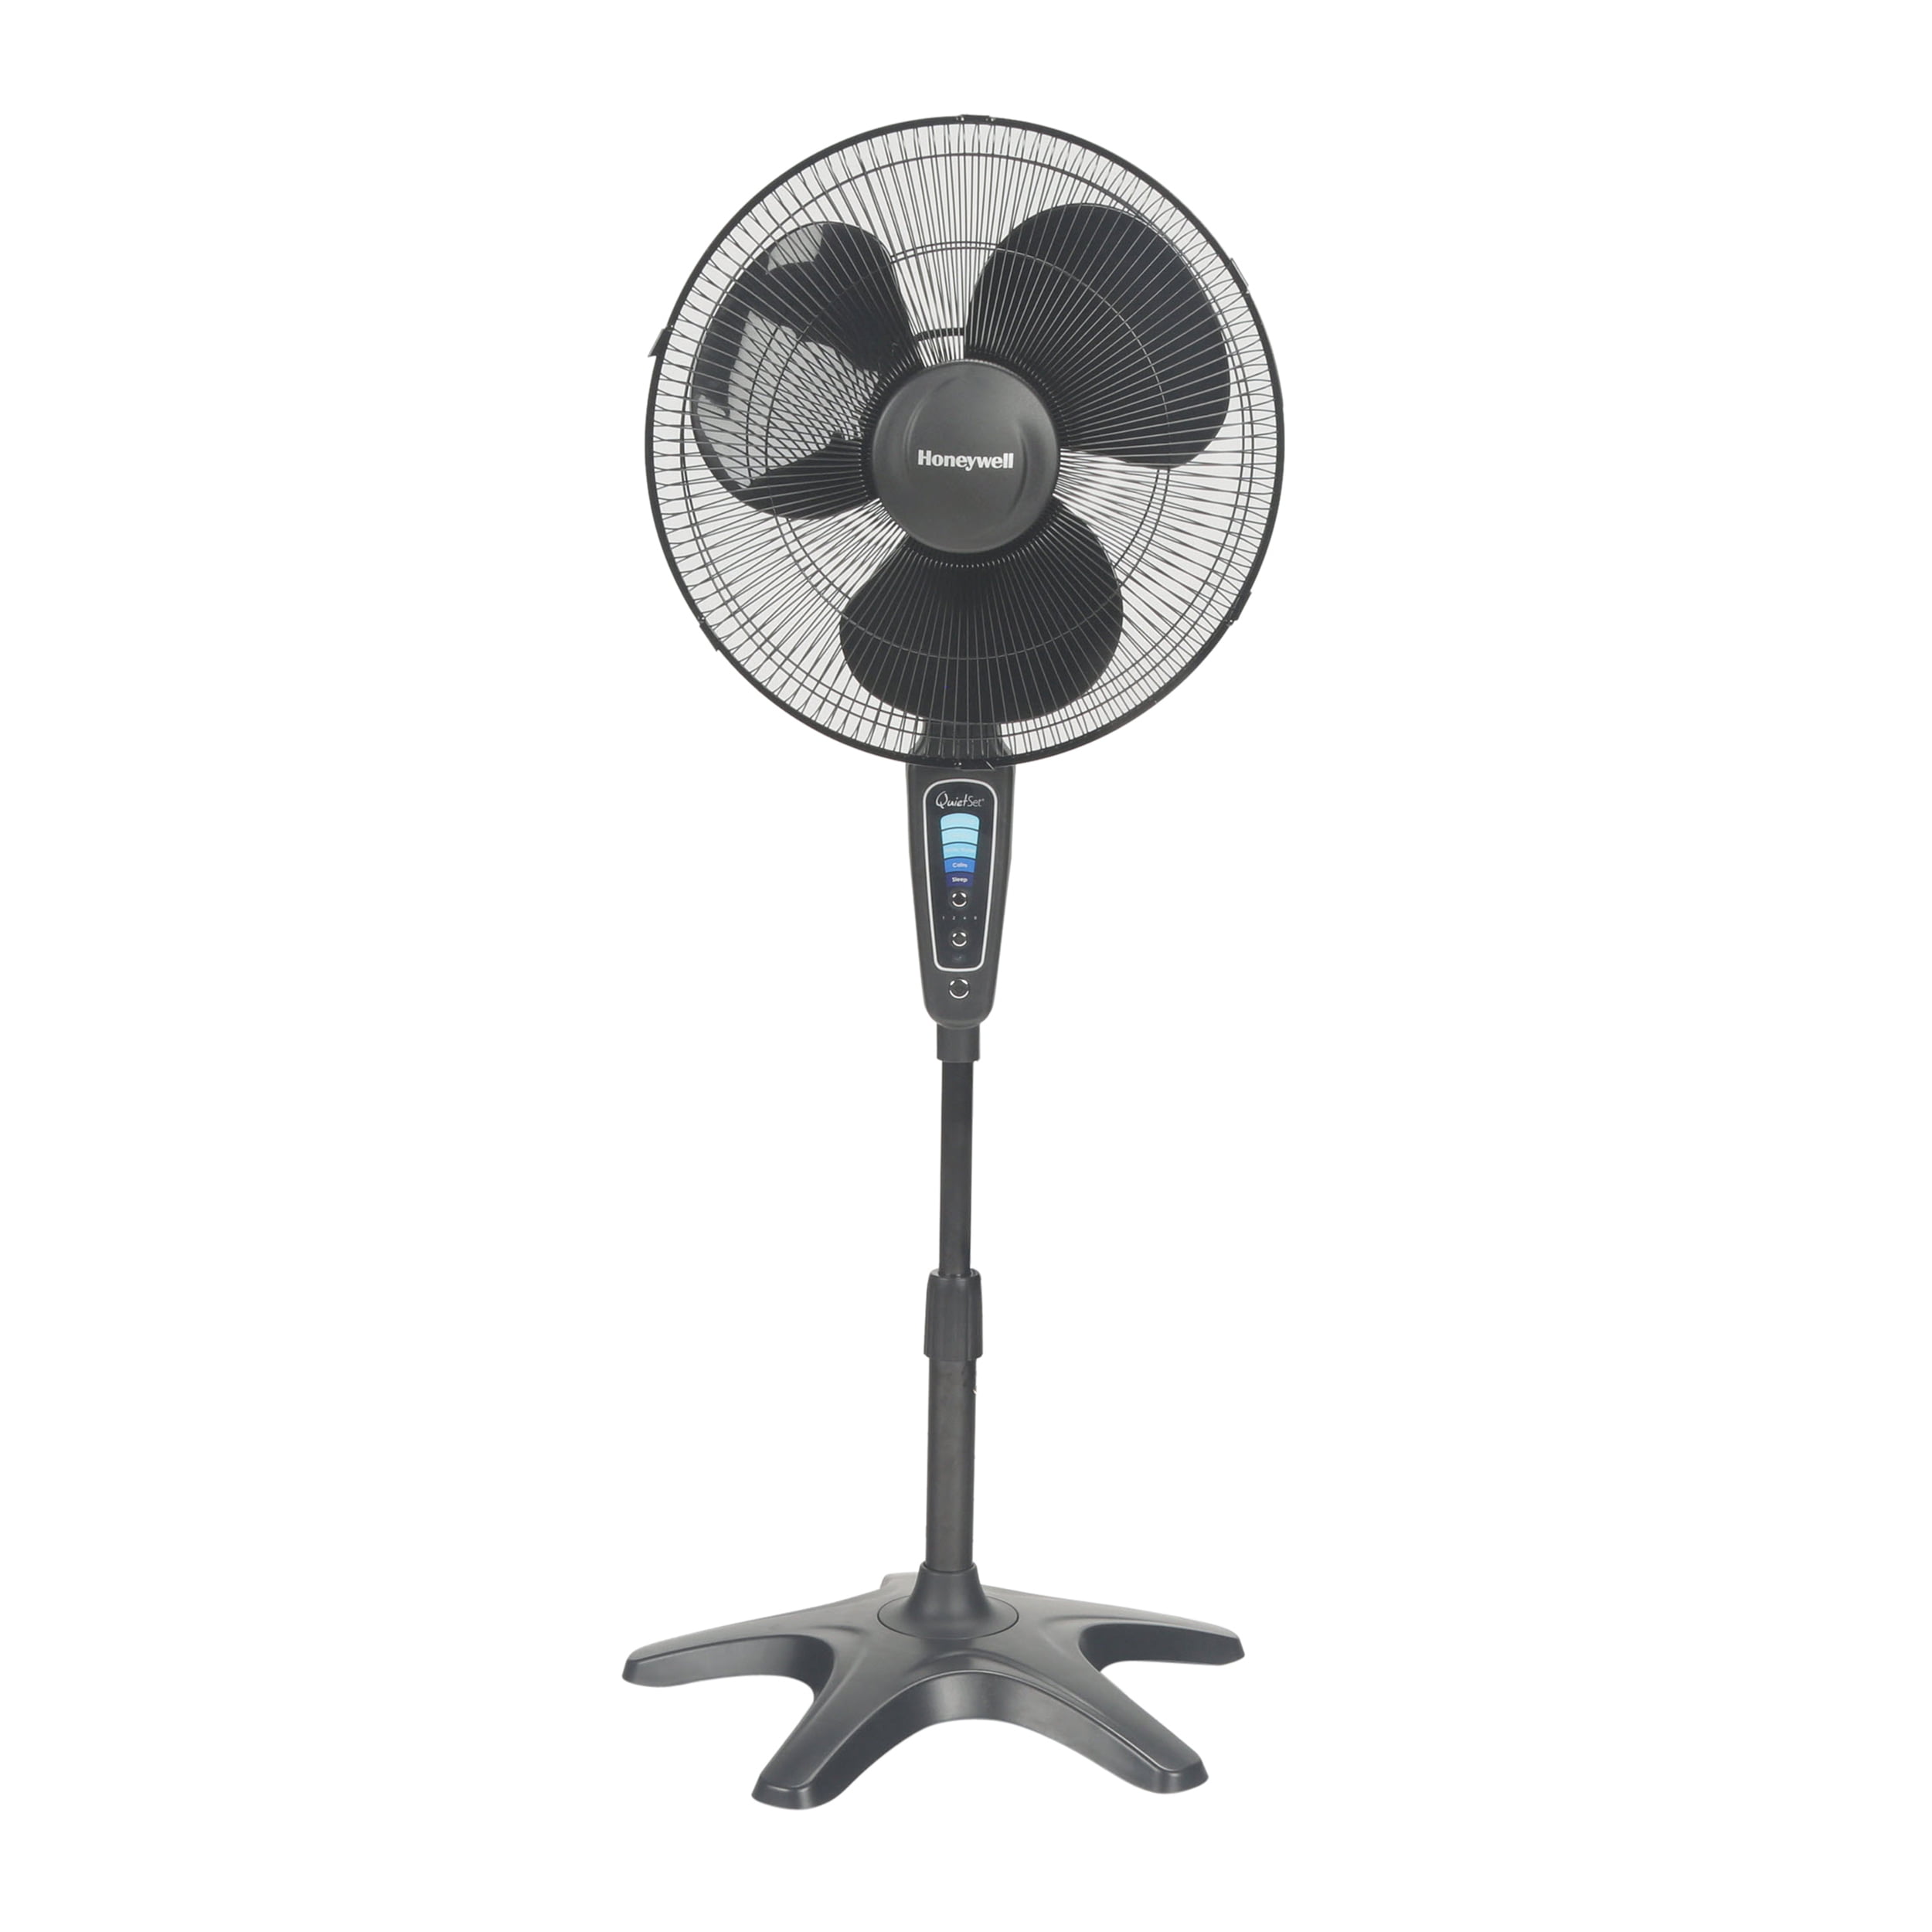 Honeywell Quietset 16 Whole Room Stand 5-Speed Fan, Model #HS-1655, Black  with Remote 